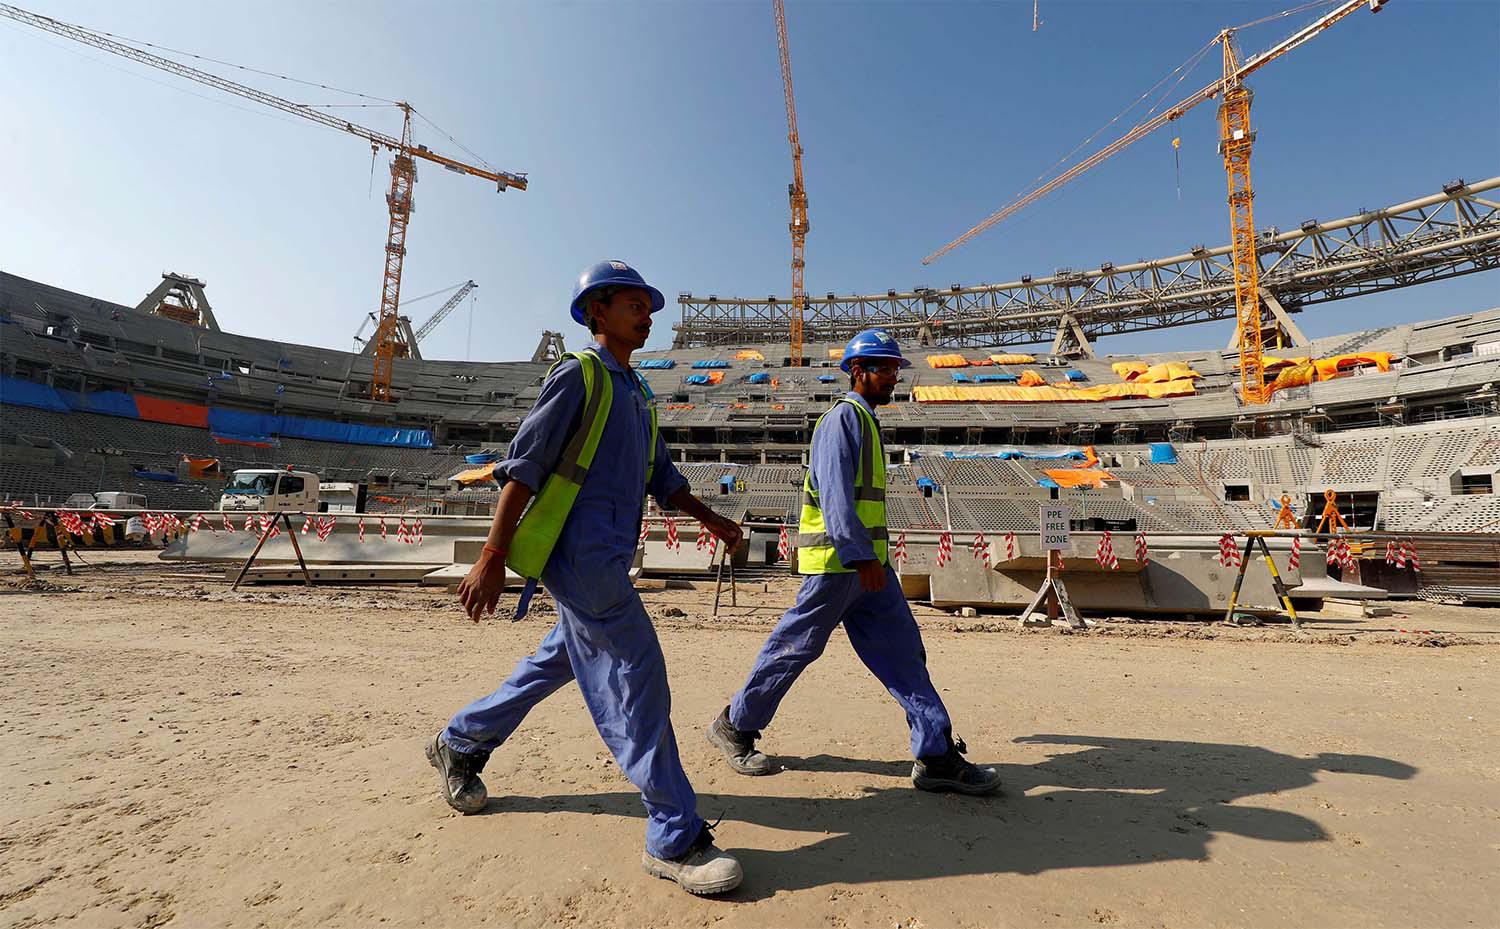 Minimum wage of $275 a month came into force for all workers in Qatar